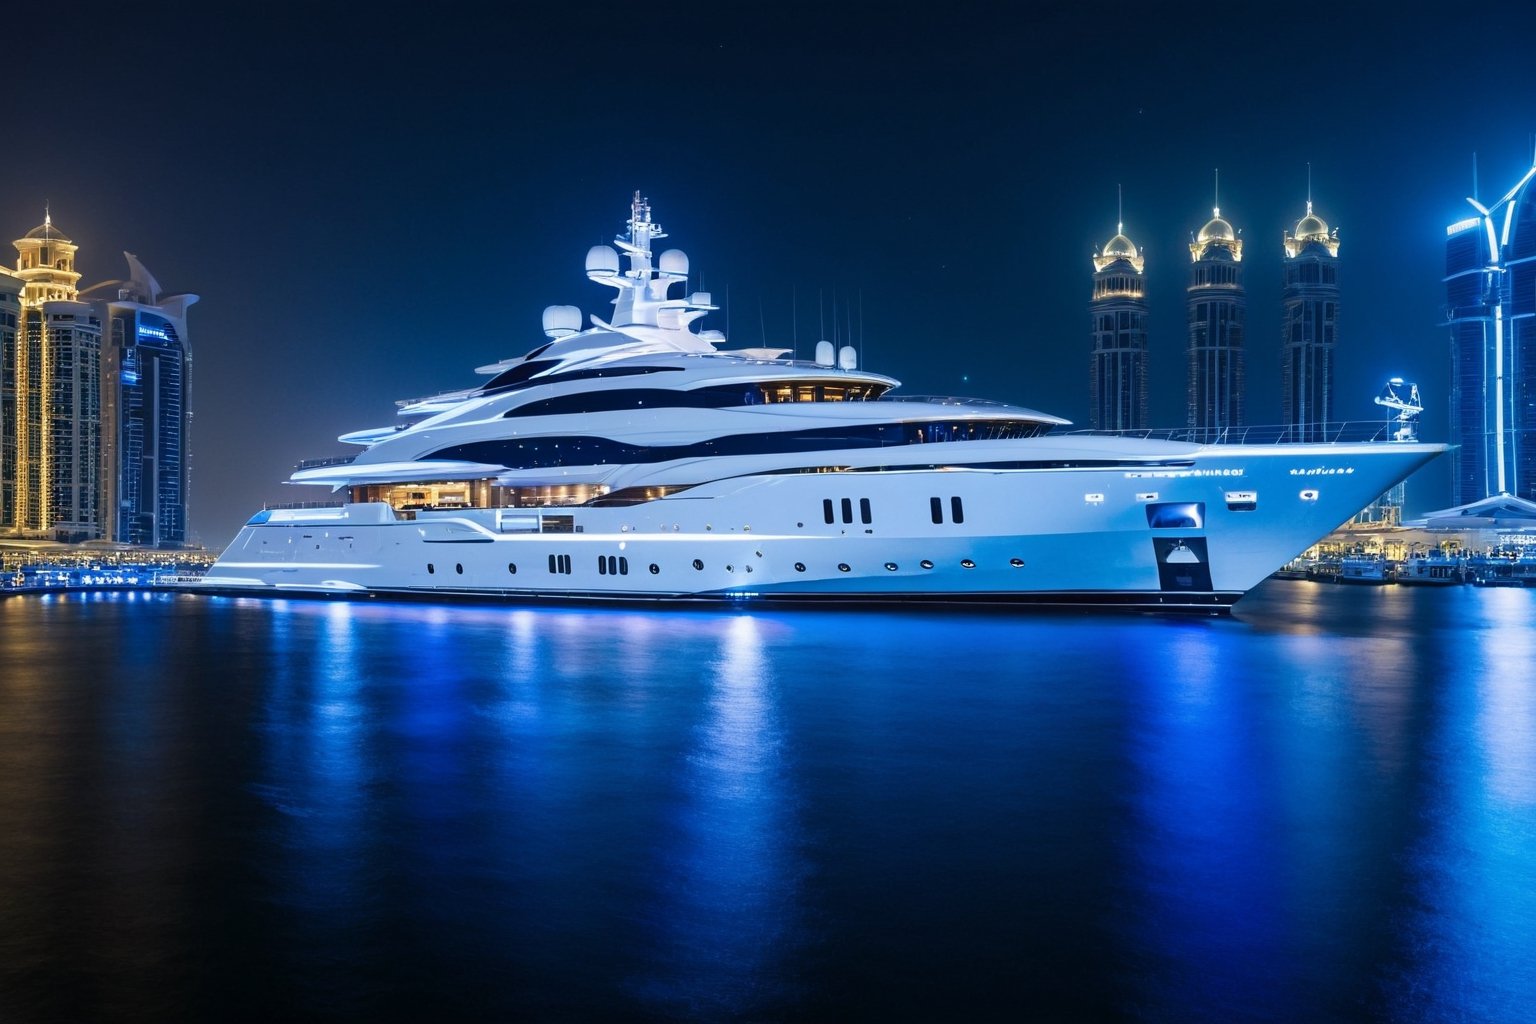 masterpiece, best quality, Wide angle product ultra detailed photo of a 156 meter super yacht docked in dubai marina. The yacht is ultra realistic. the weather is overcast, perfect simetry, ultra shaper, 35mm photography, professional, 8k, highly detailed, extremely realistic., Movie still, night time, blue led yacht lights in water, 3 levels only, helipad with helicopter shown static ,Extremely Realistic,Movie Still